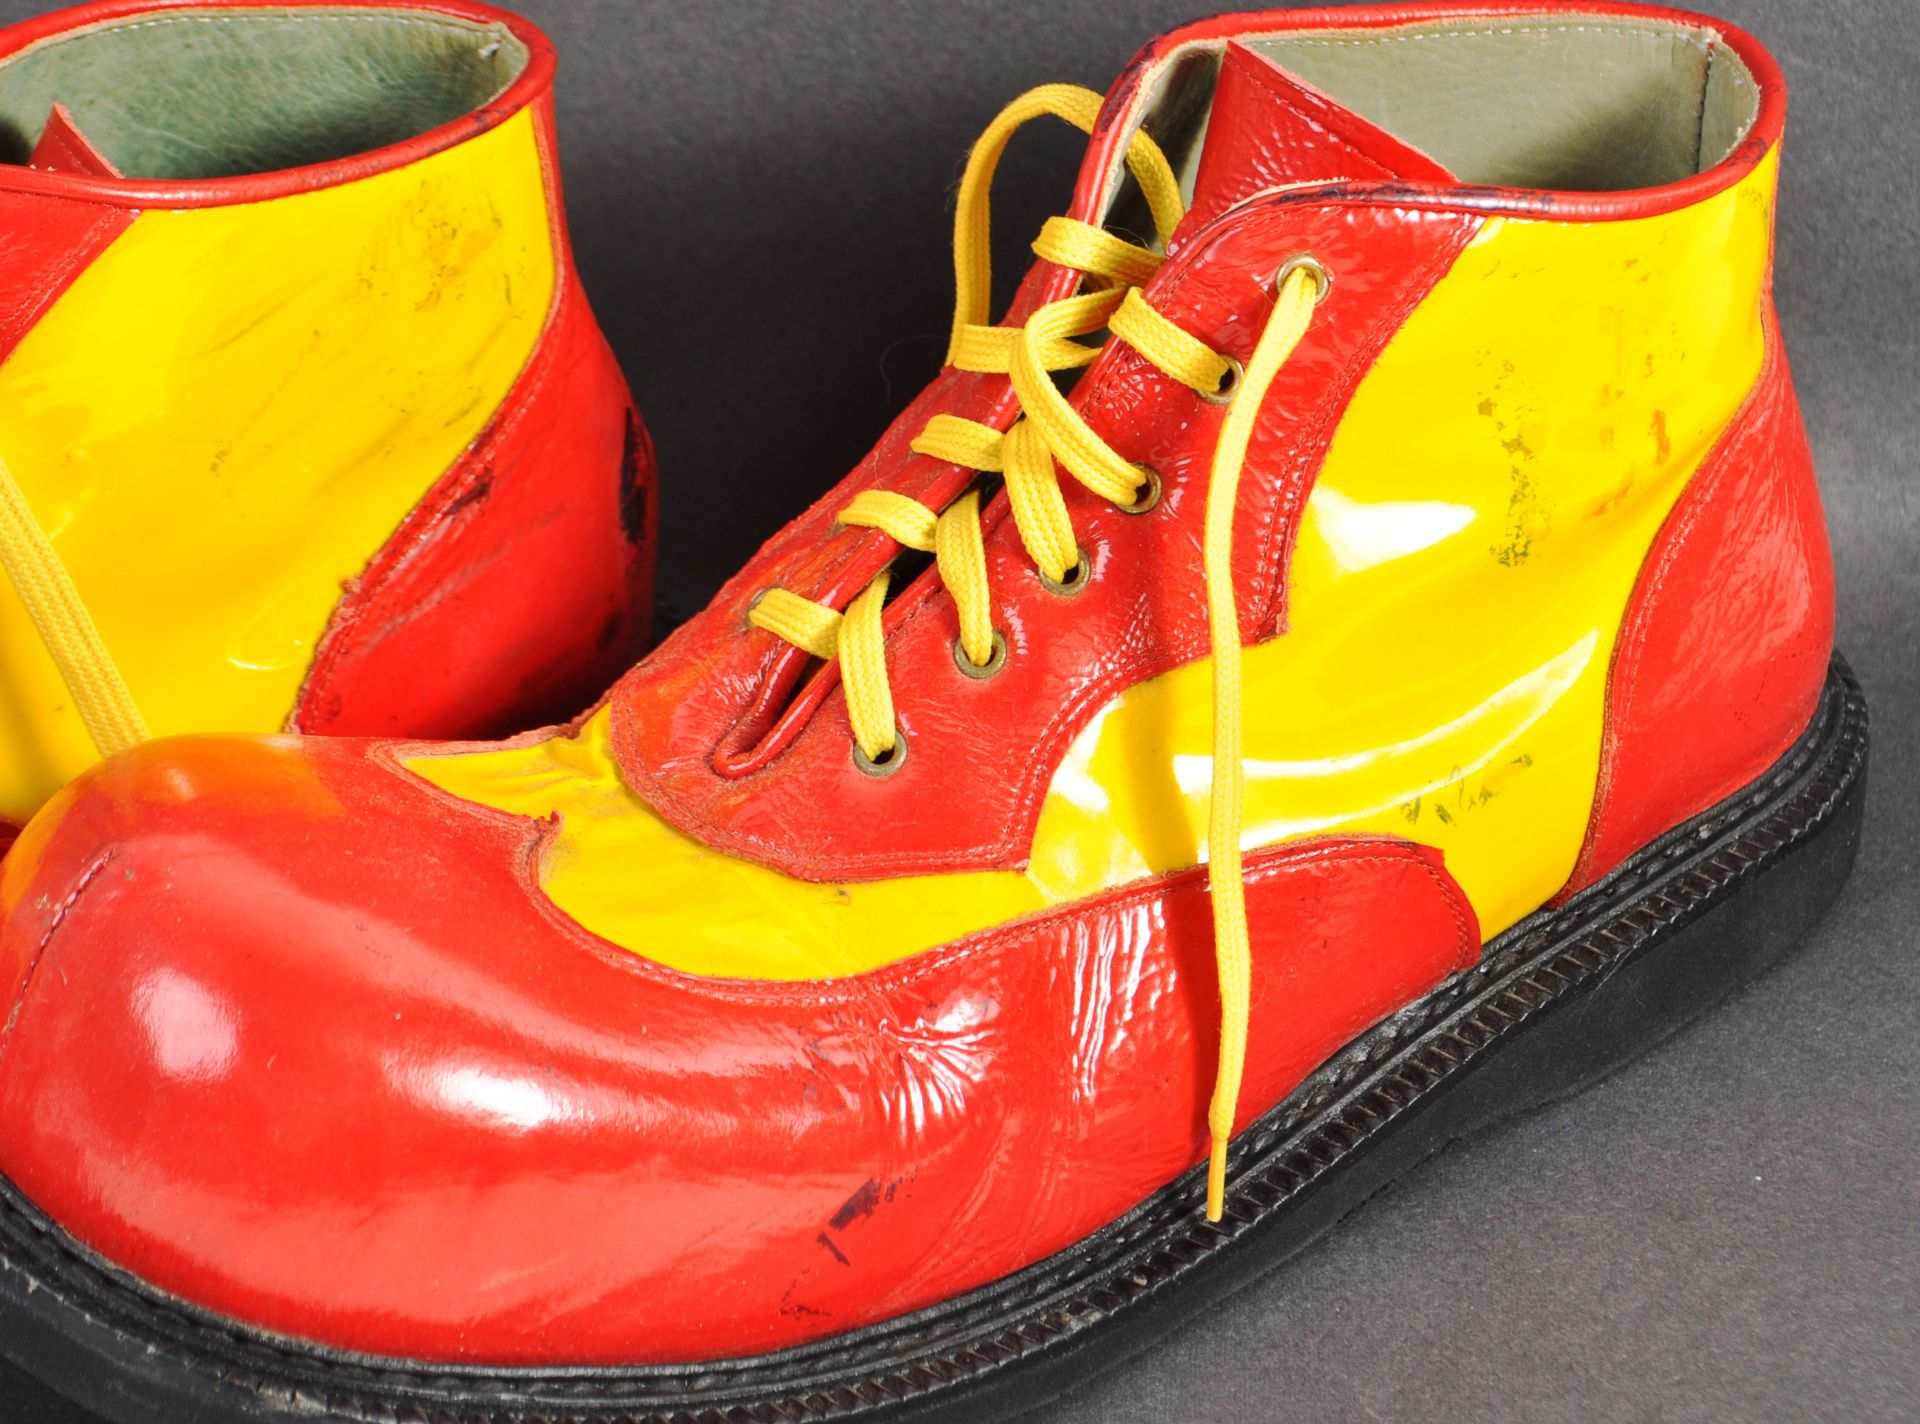 PAIR OF VINTAGE RED & YELLOW CLOWN SHOES - Image 3 of 5